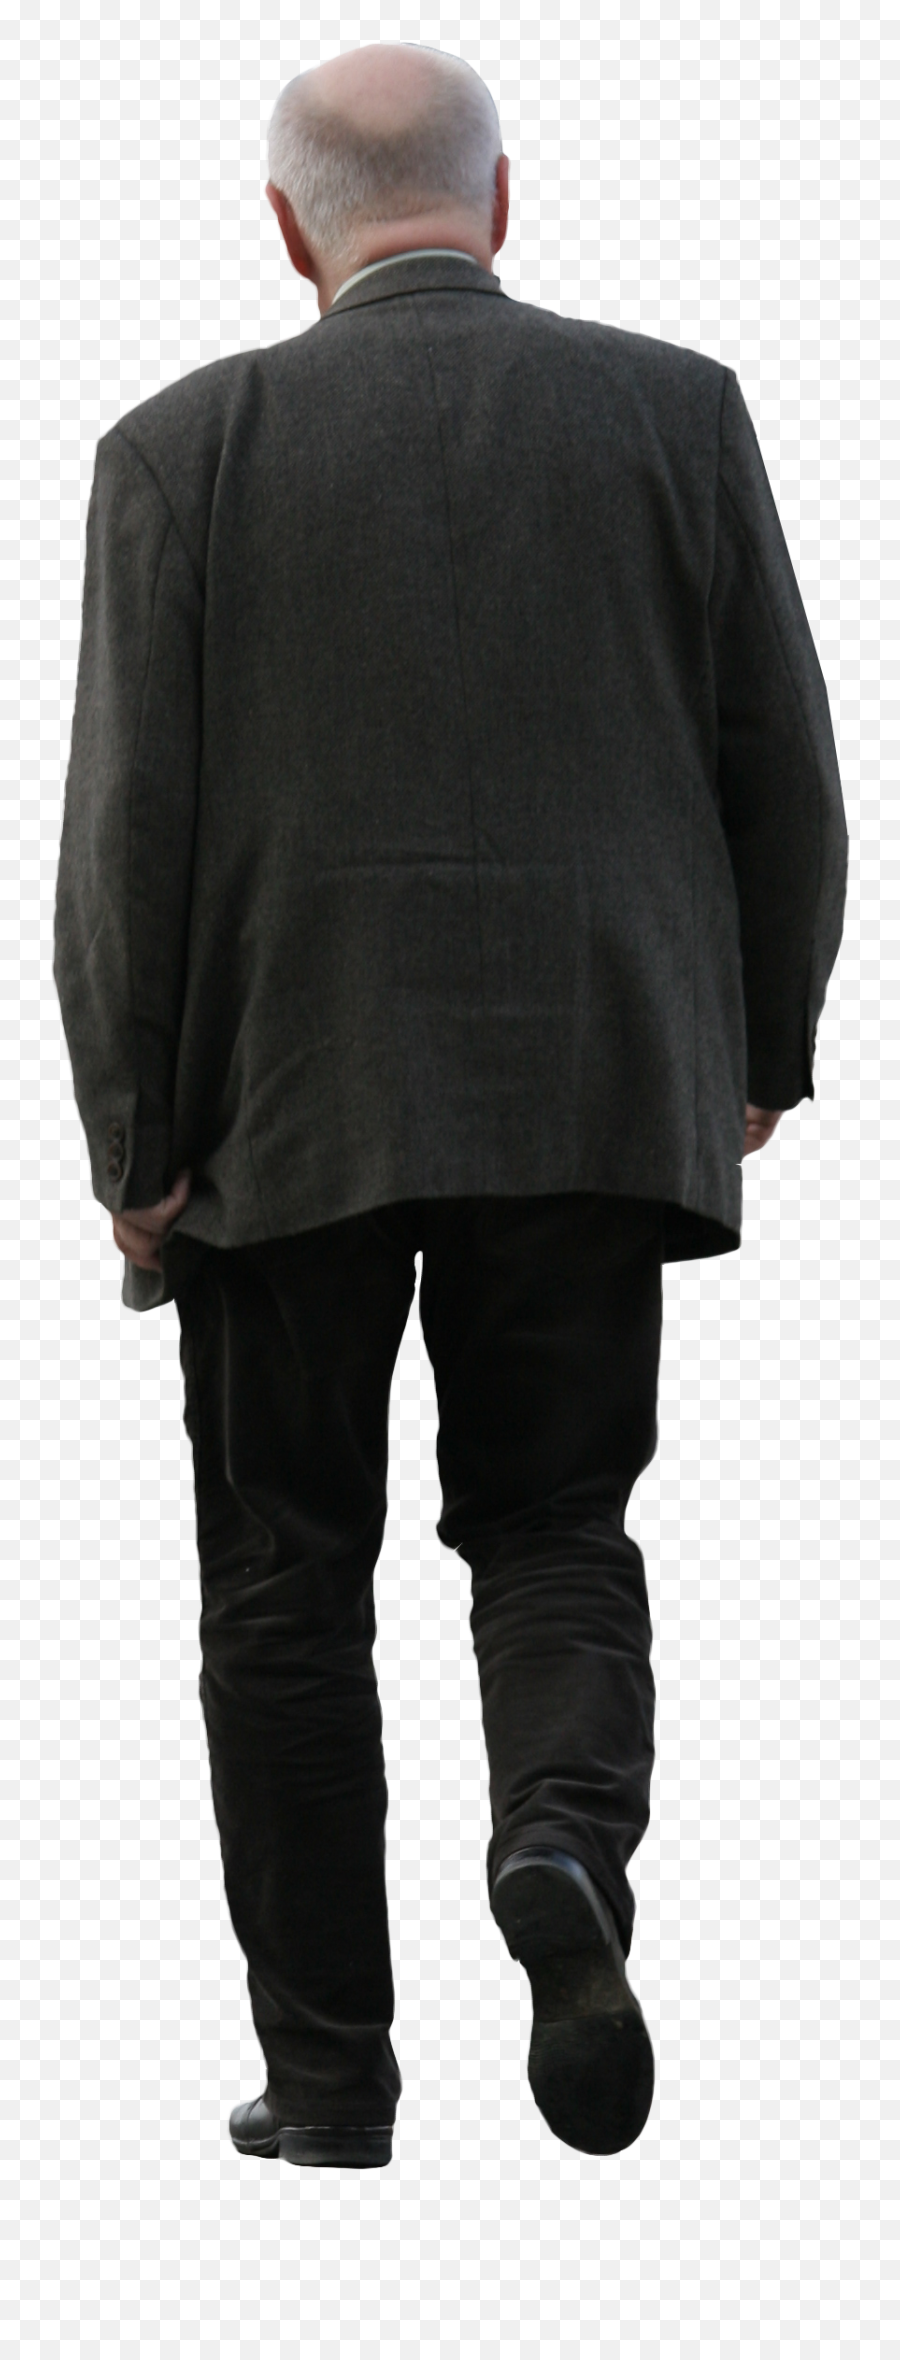 Walking Old Man - 2d Cutout People Png,Old Man Png